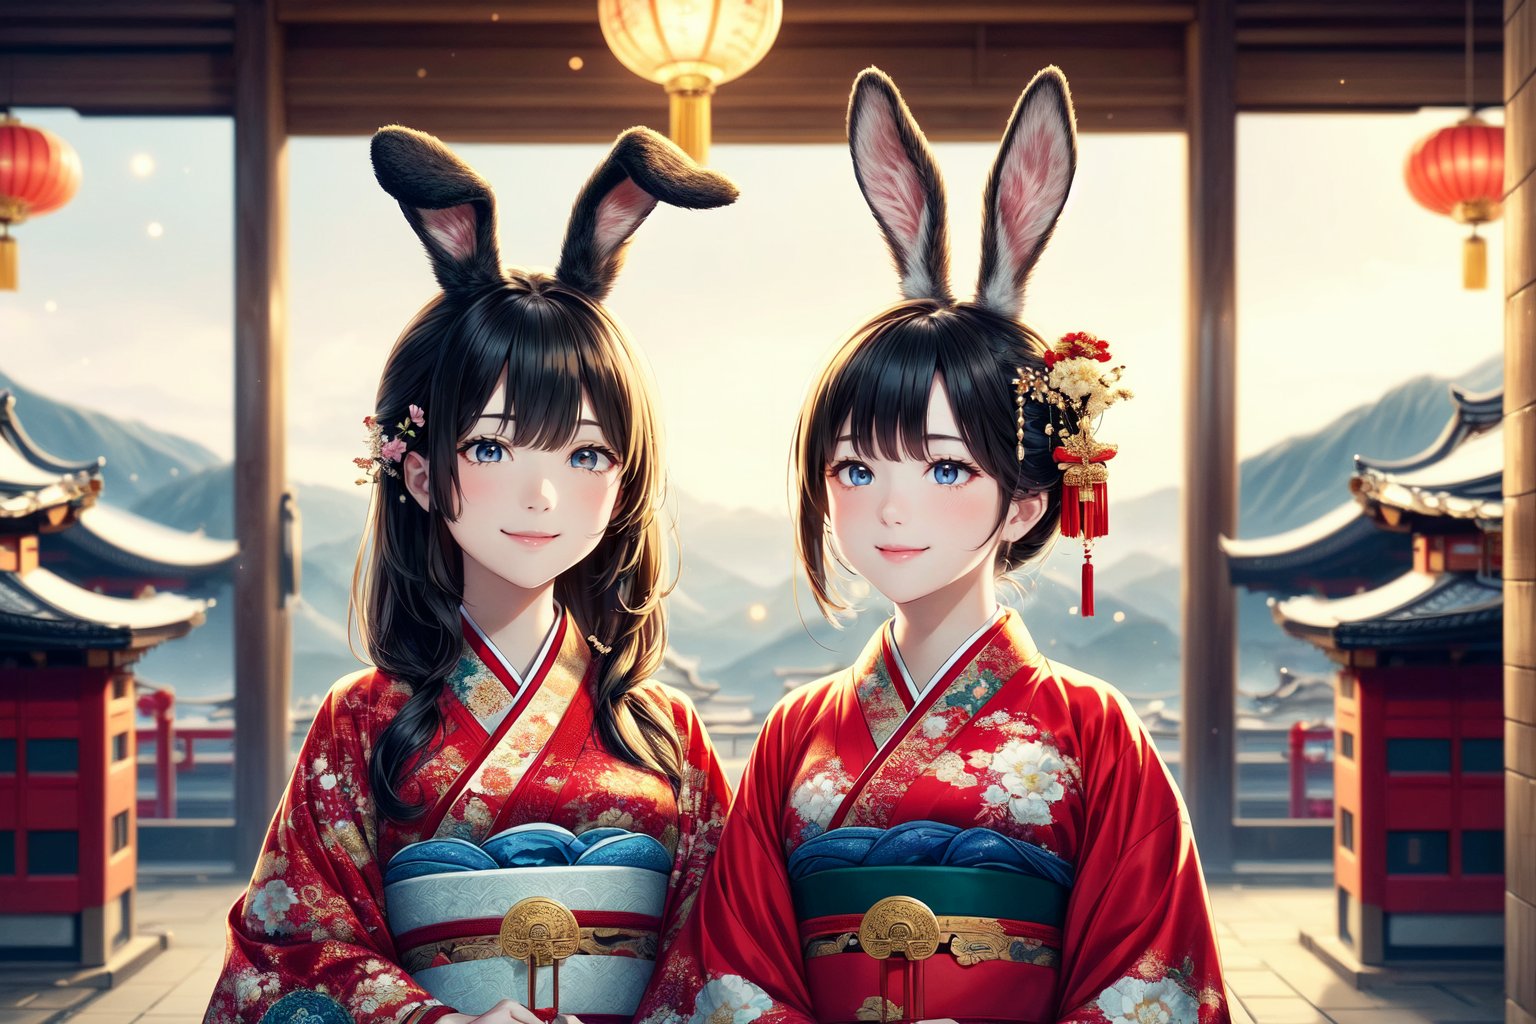 In a Japanese New Year's Eve night scene, two anime-style girls, one with rabbit ears and the other with dragon horns, are praying together. In the background, a large Joya no Kane (New Year's Eve bell) is visible. Both girls are smiling gently and are wearing traditional kimonos with chokers. The atmosphere is serene and spiritual, with a snowy background and the dimly lit temple, reflecting the peacefulness of the New Year's Eve in Japan.